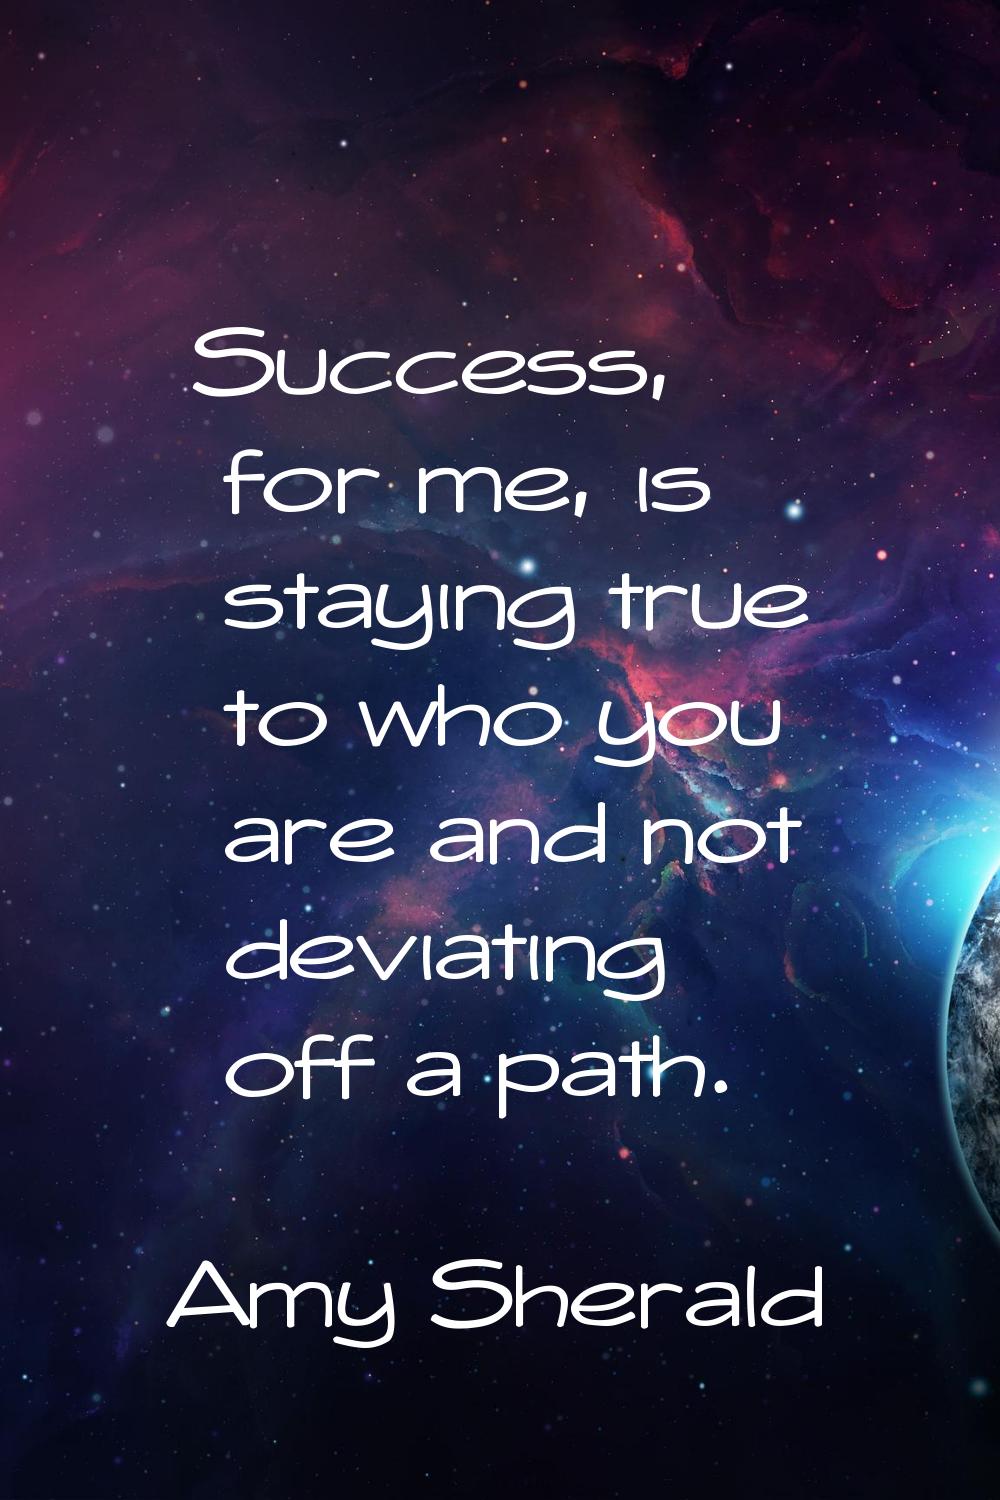 Success, for me, is staying true to who you are and not deviating off a path.